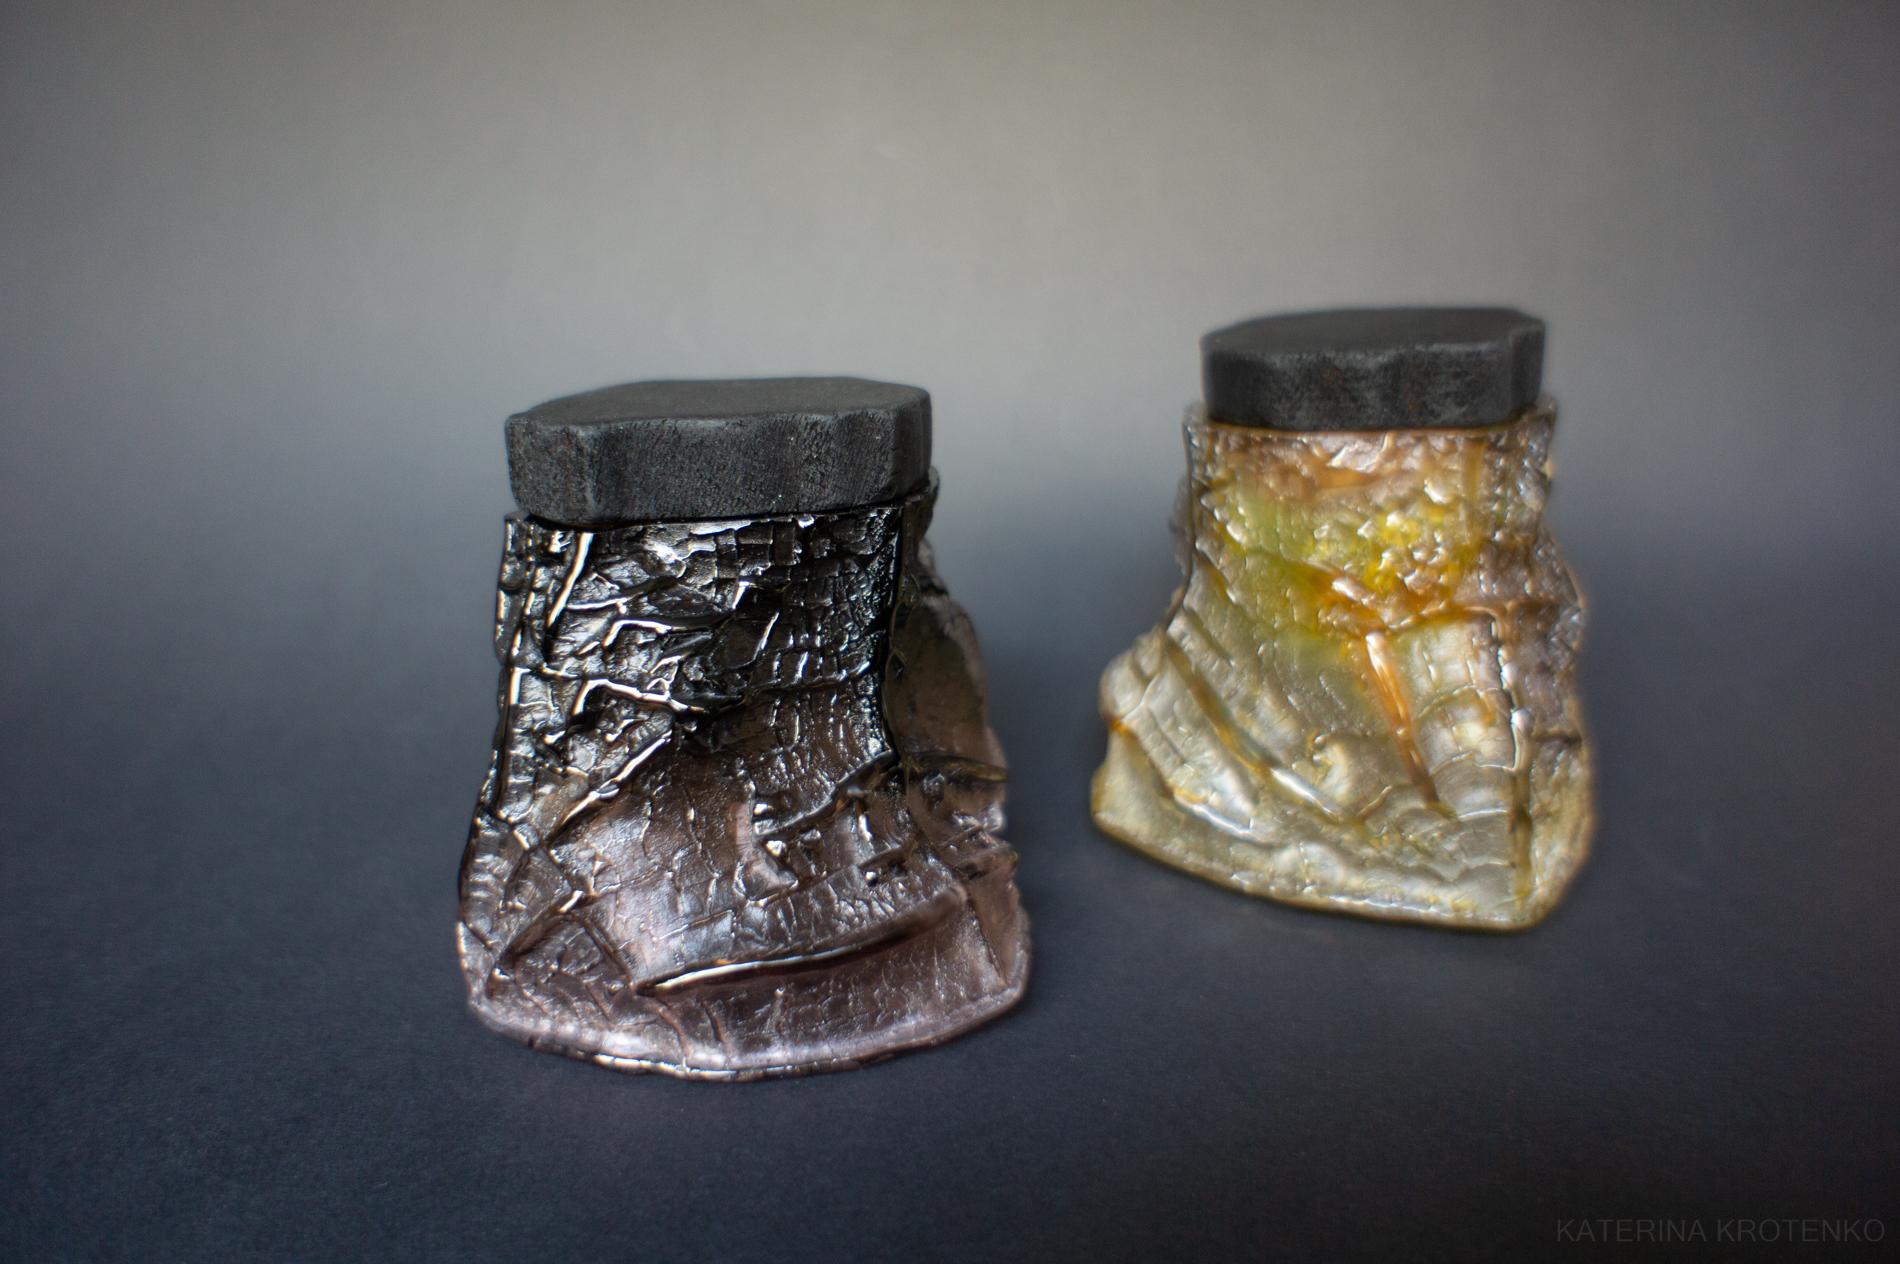 Katerina Krotenko Still-Life Sculpture - Drago — a pair of two glass treasuries, golden dragon & grounded brown